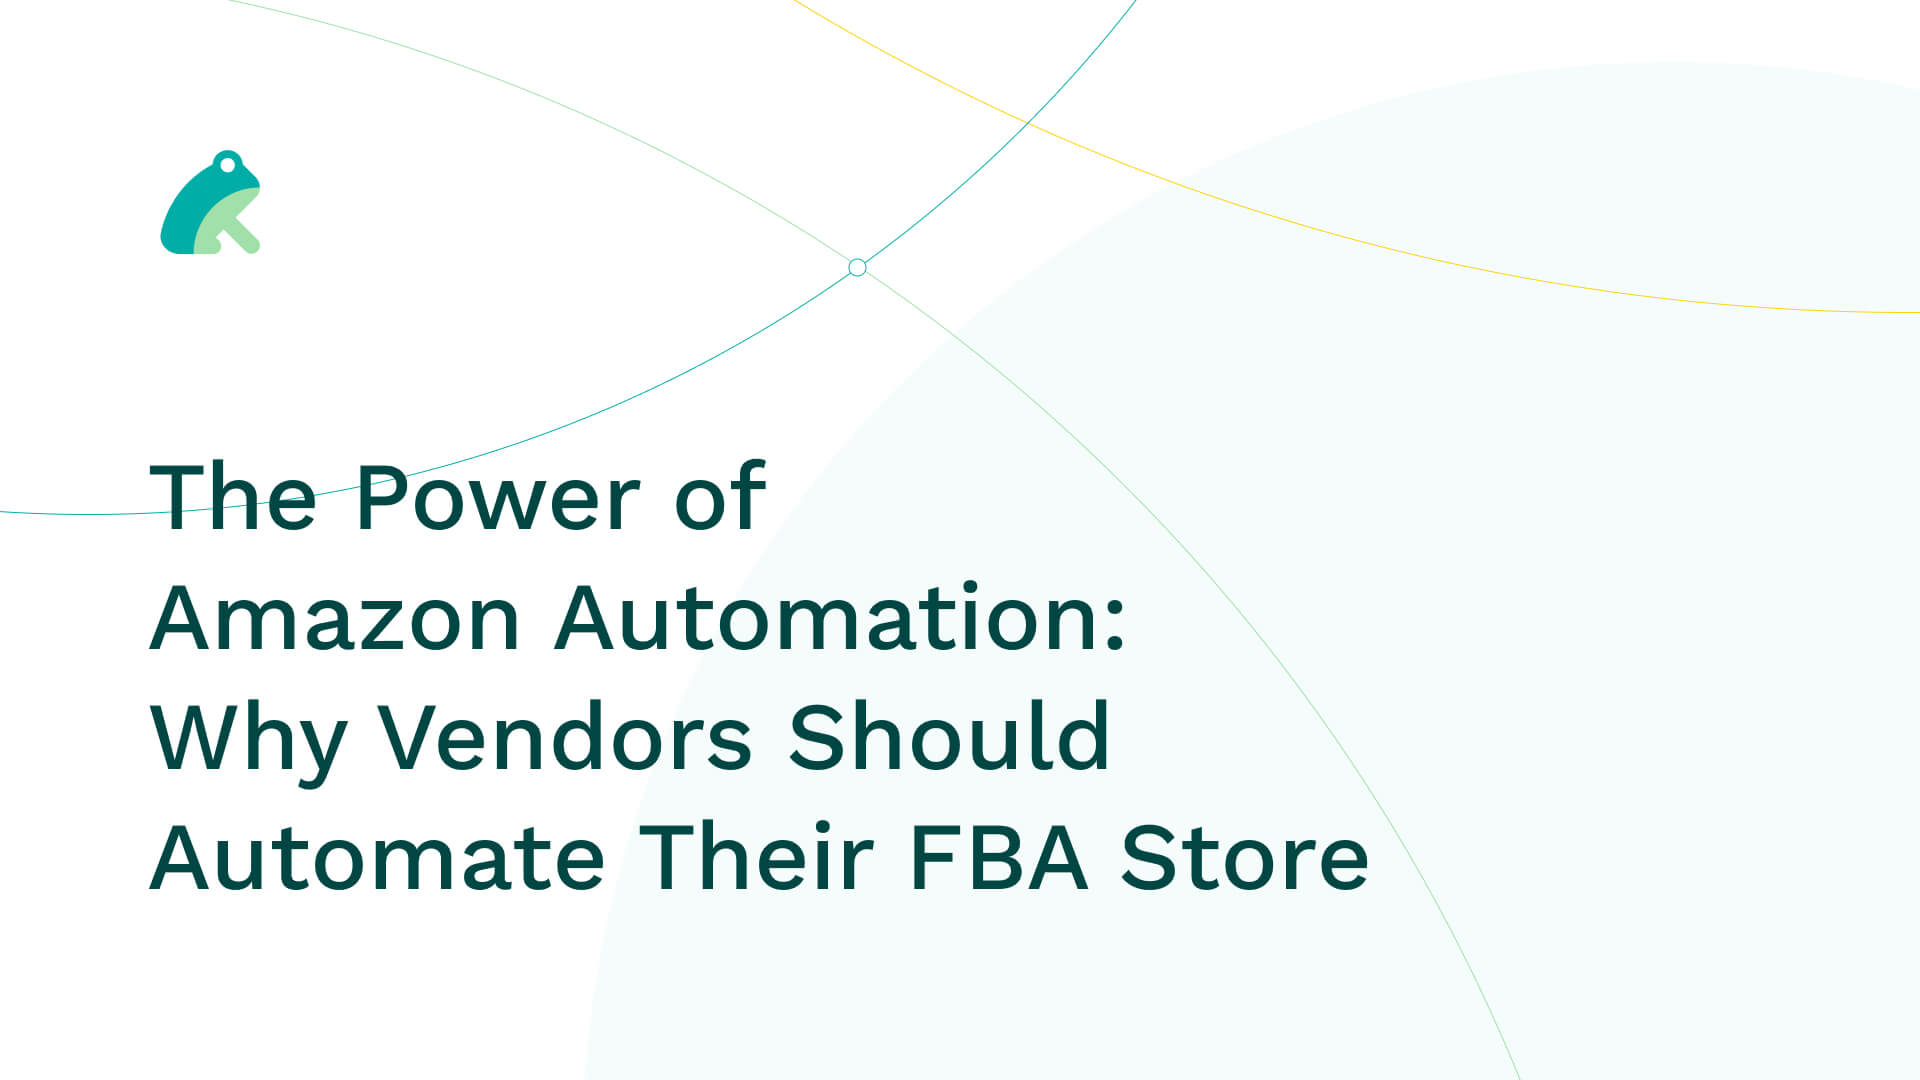 The Power of Amazon Automation: Why Vendors Should Automate Their FBA Store